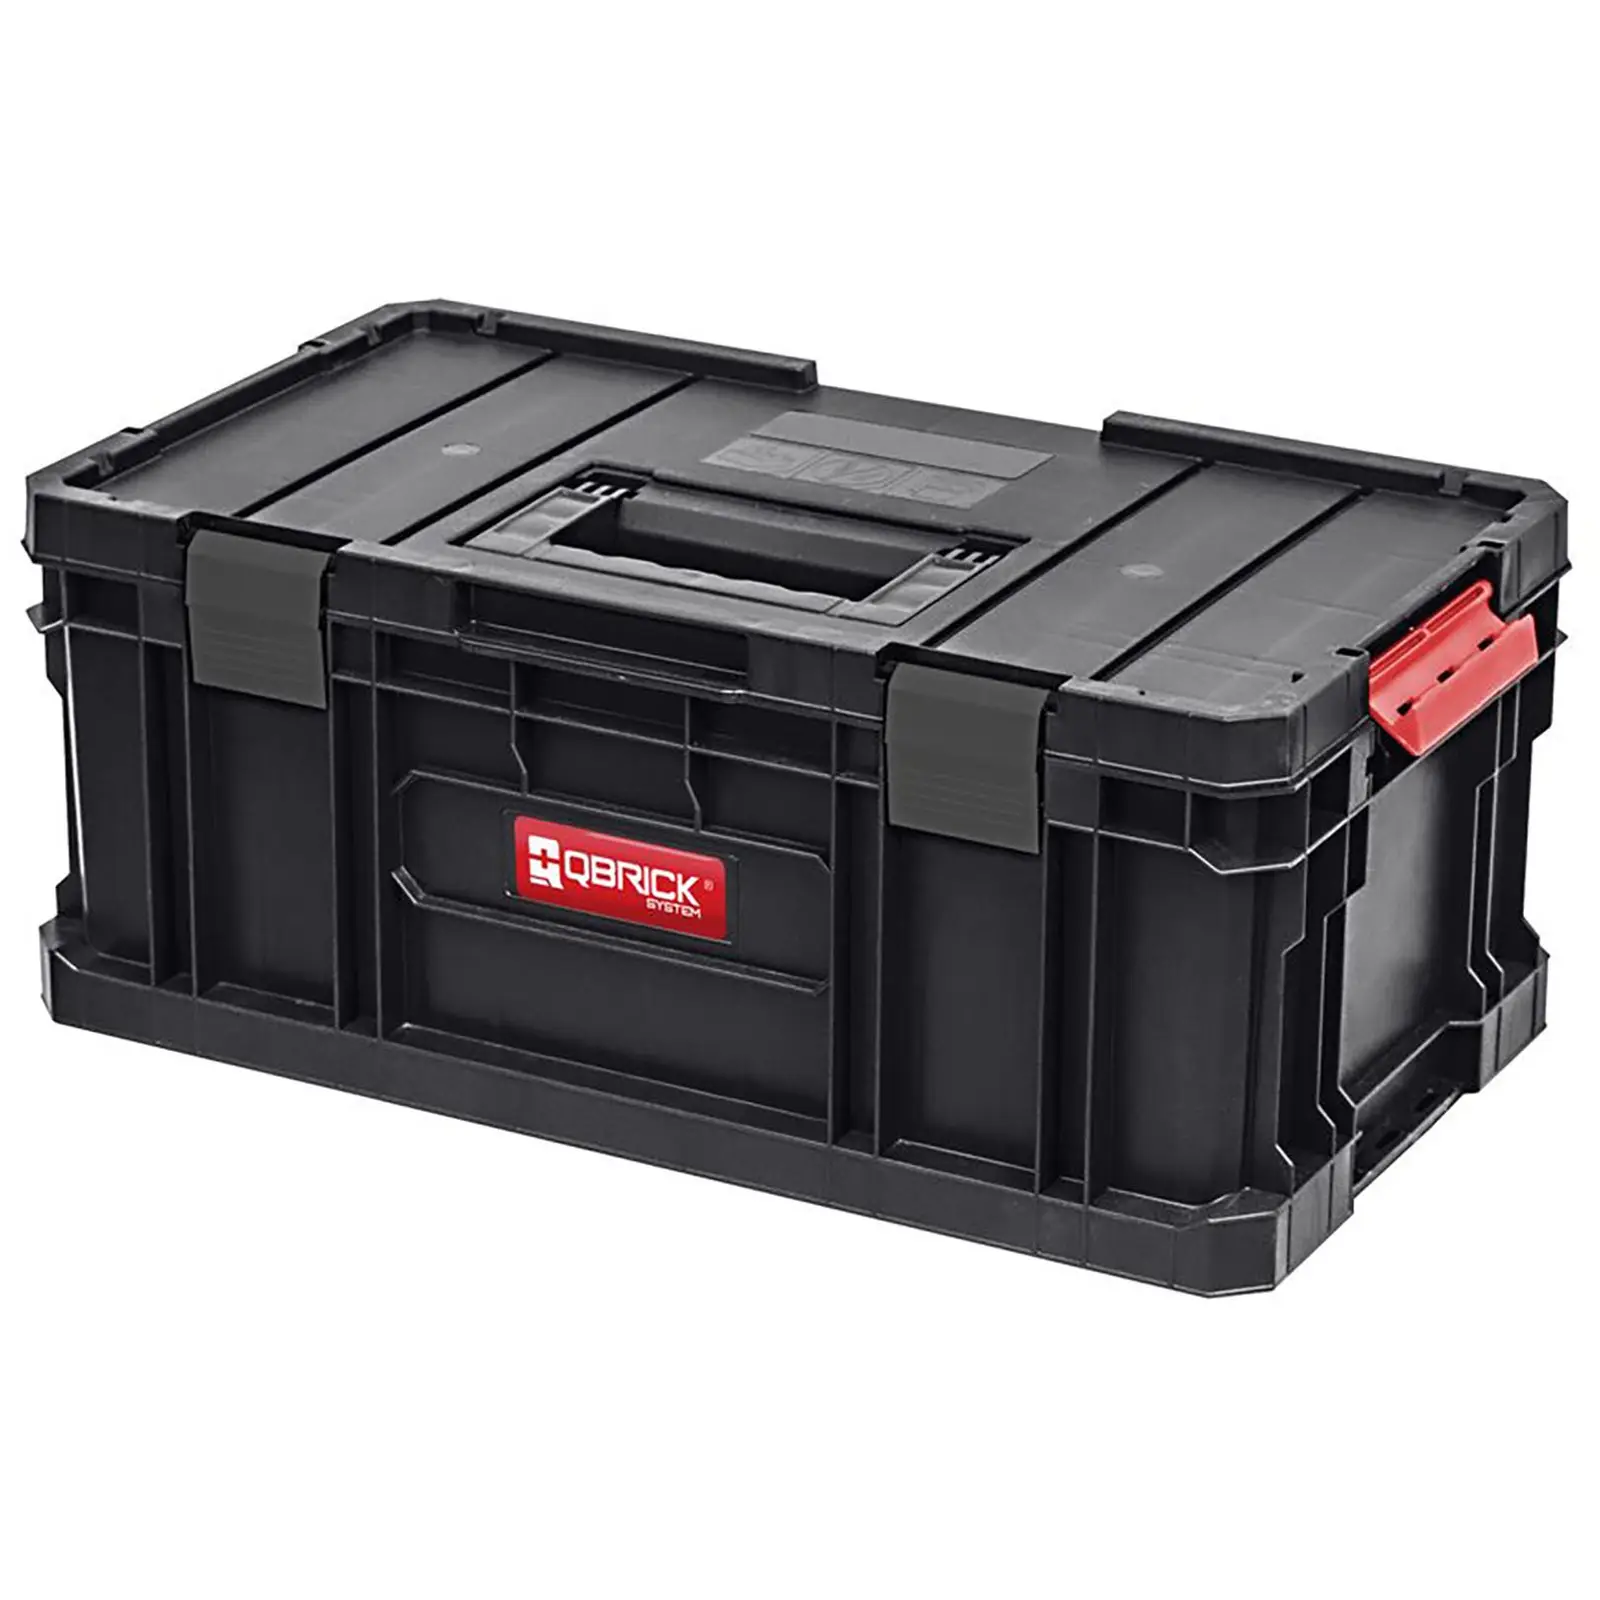 7-in-1 Toolbox set with platform and organizer